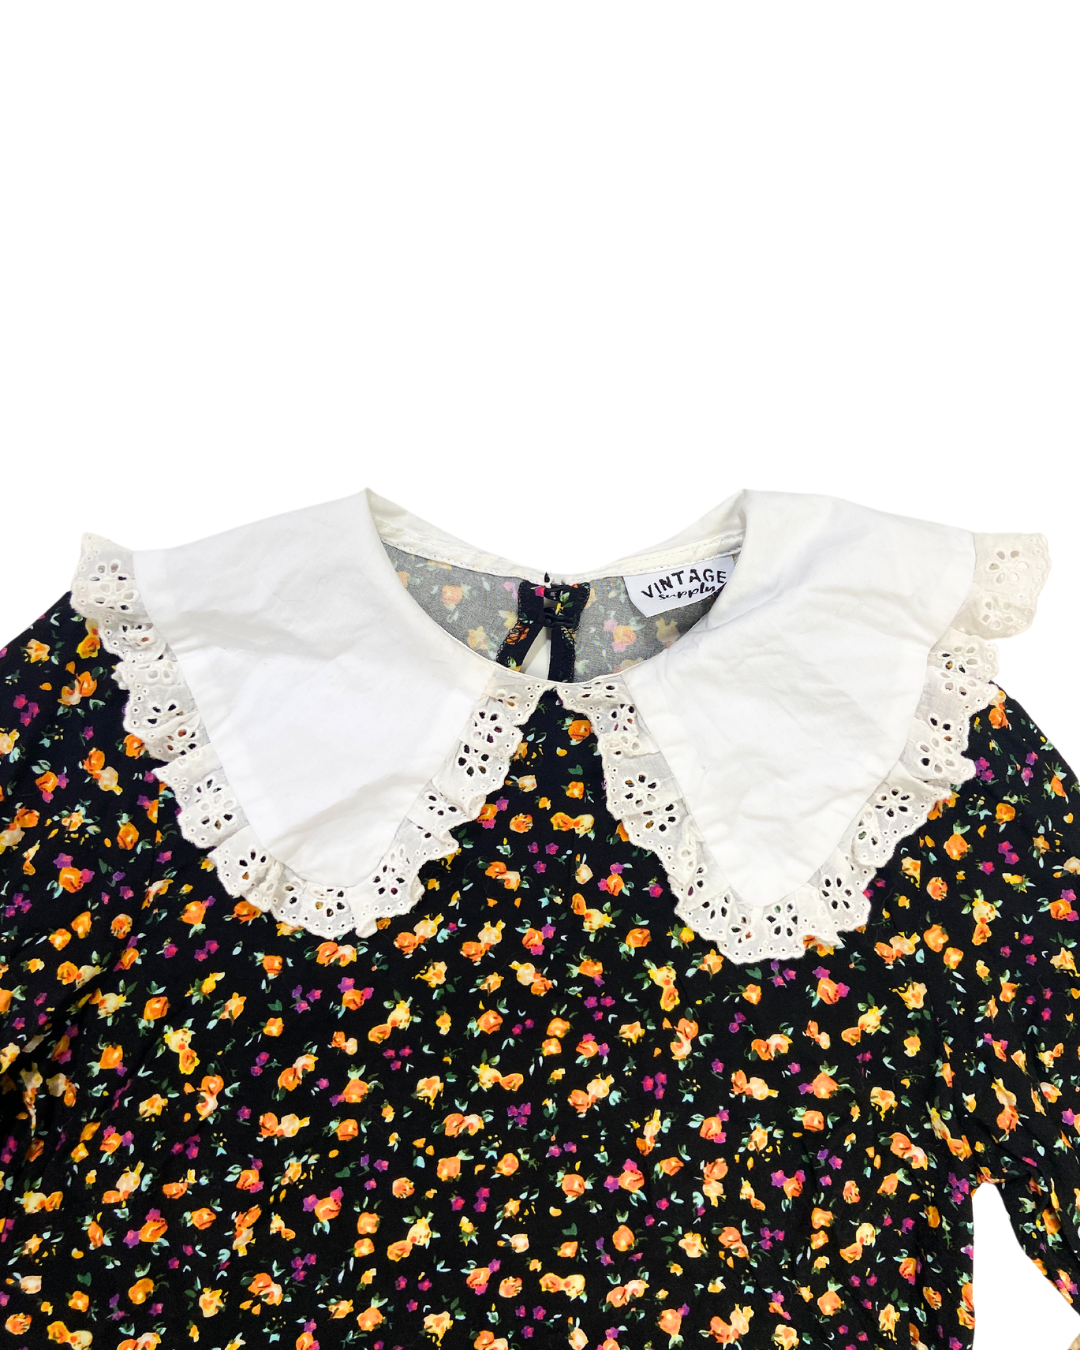 Vintage Supply Floral Dress with Lace Collar